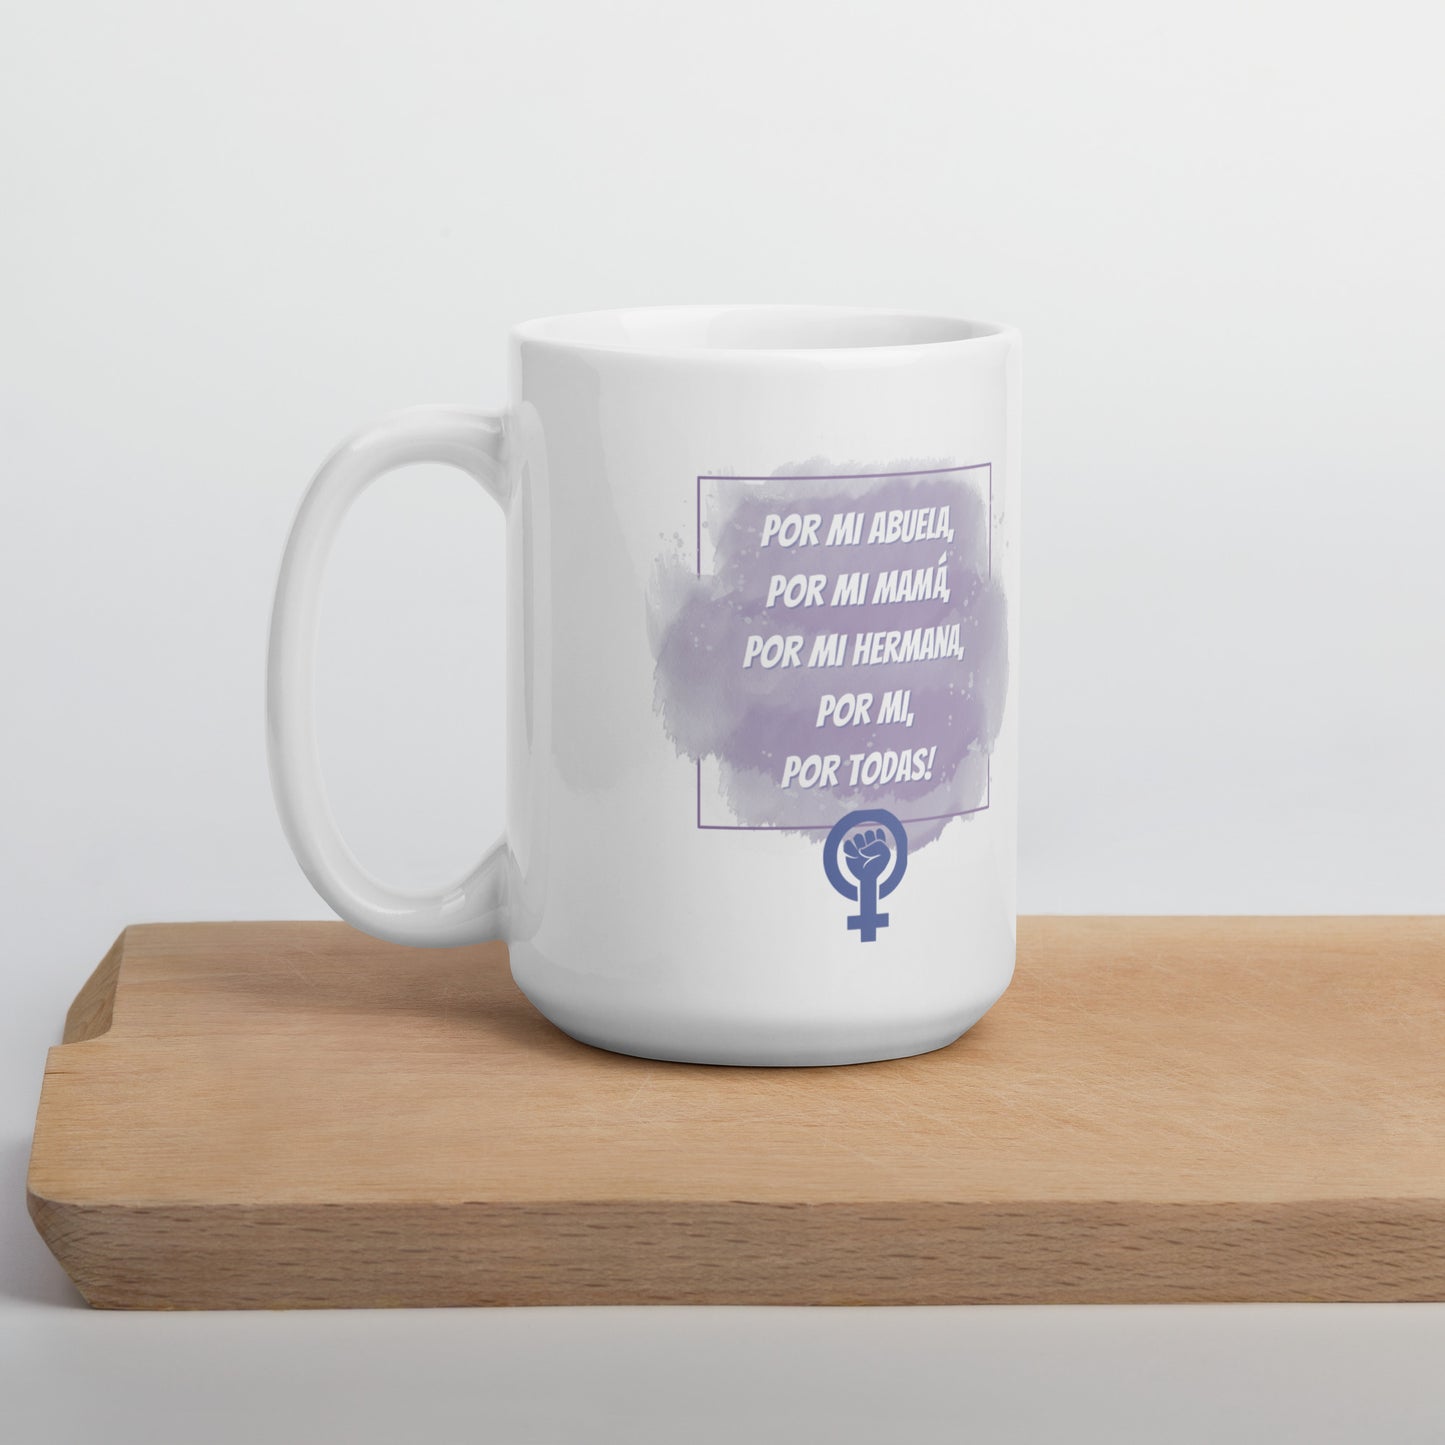 For my grandmother, for my mom, for my sister, for me, for everyone! Cup